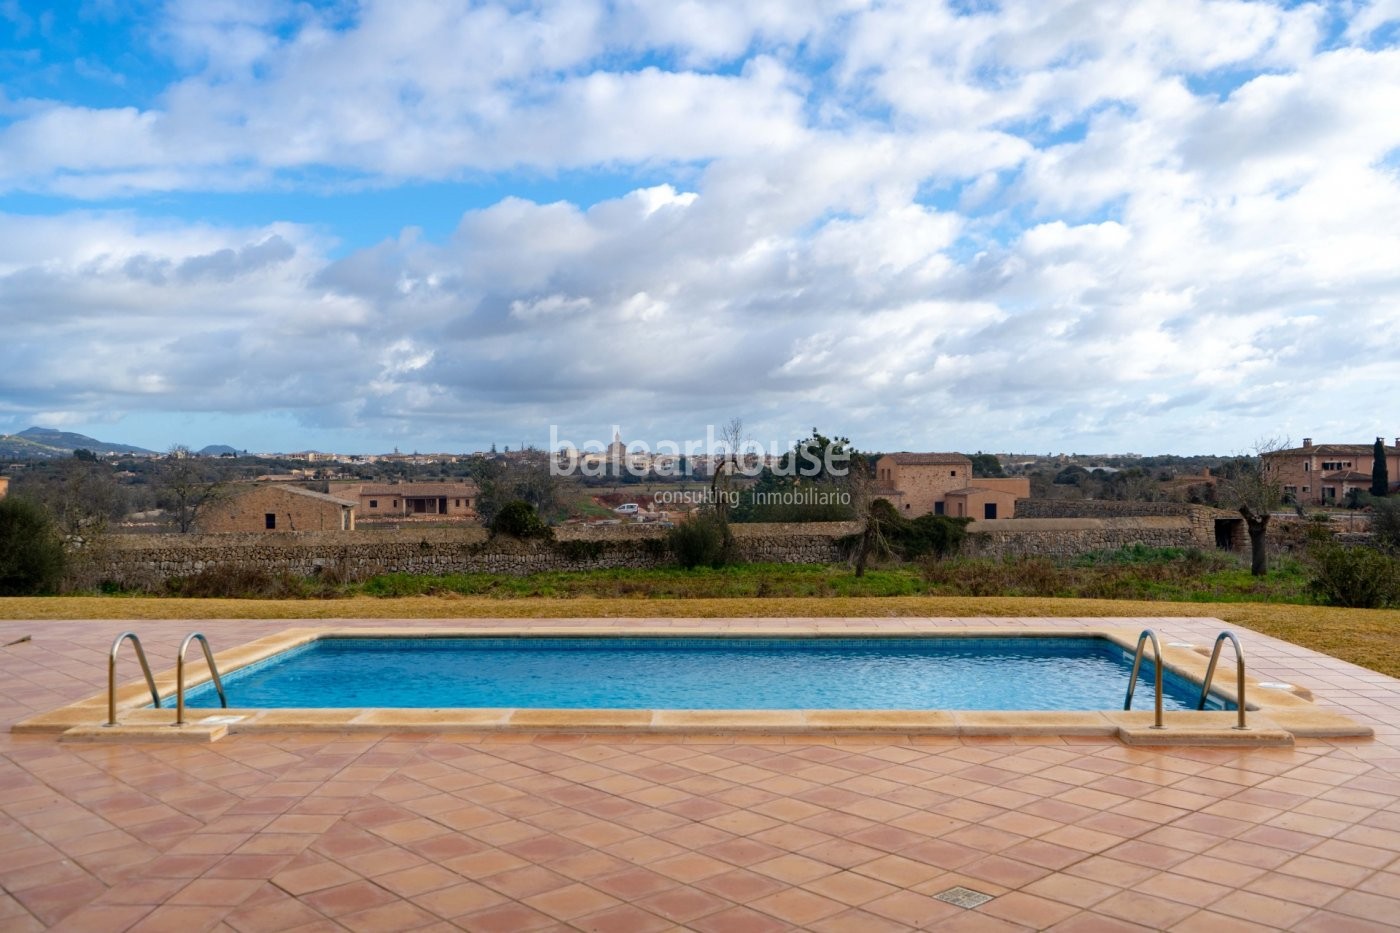 Extensive country estate in Santanyí, pure rural essence very close to spectacular beaches.